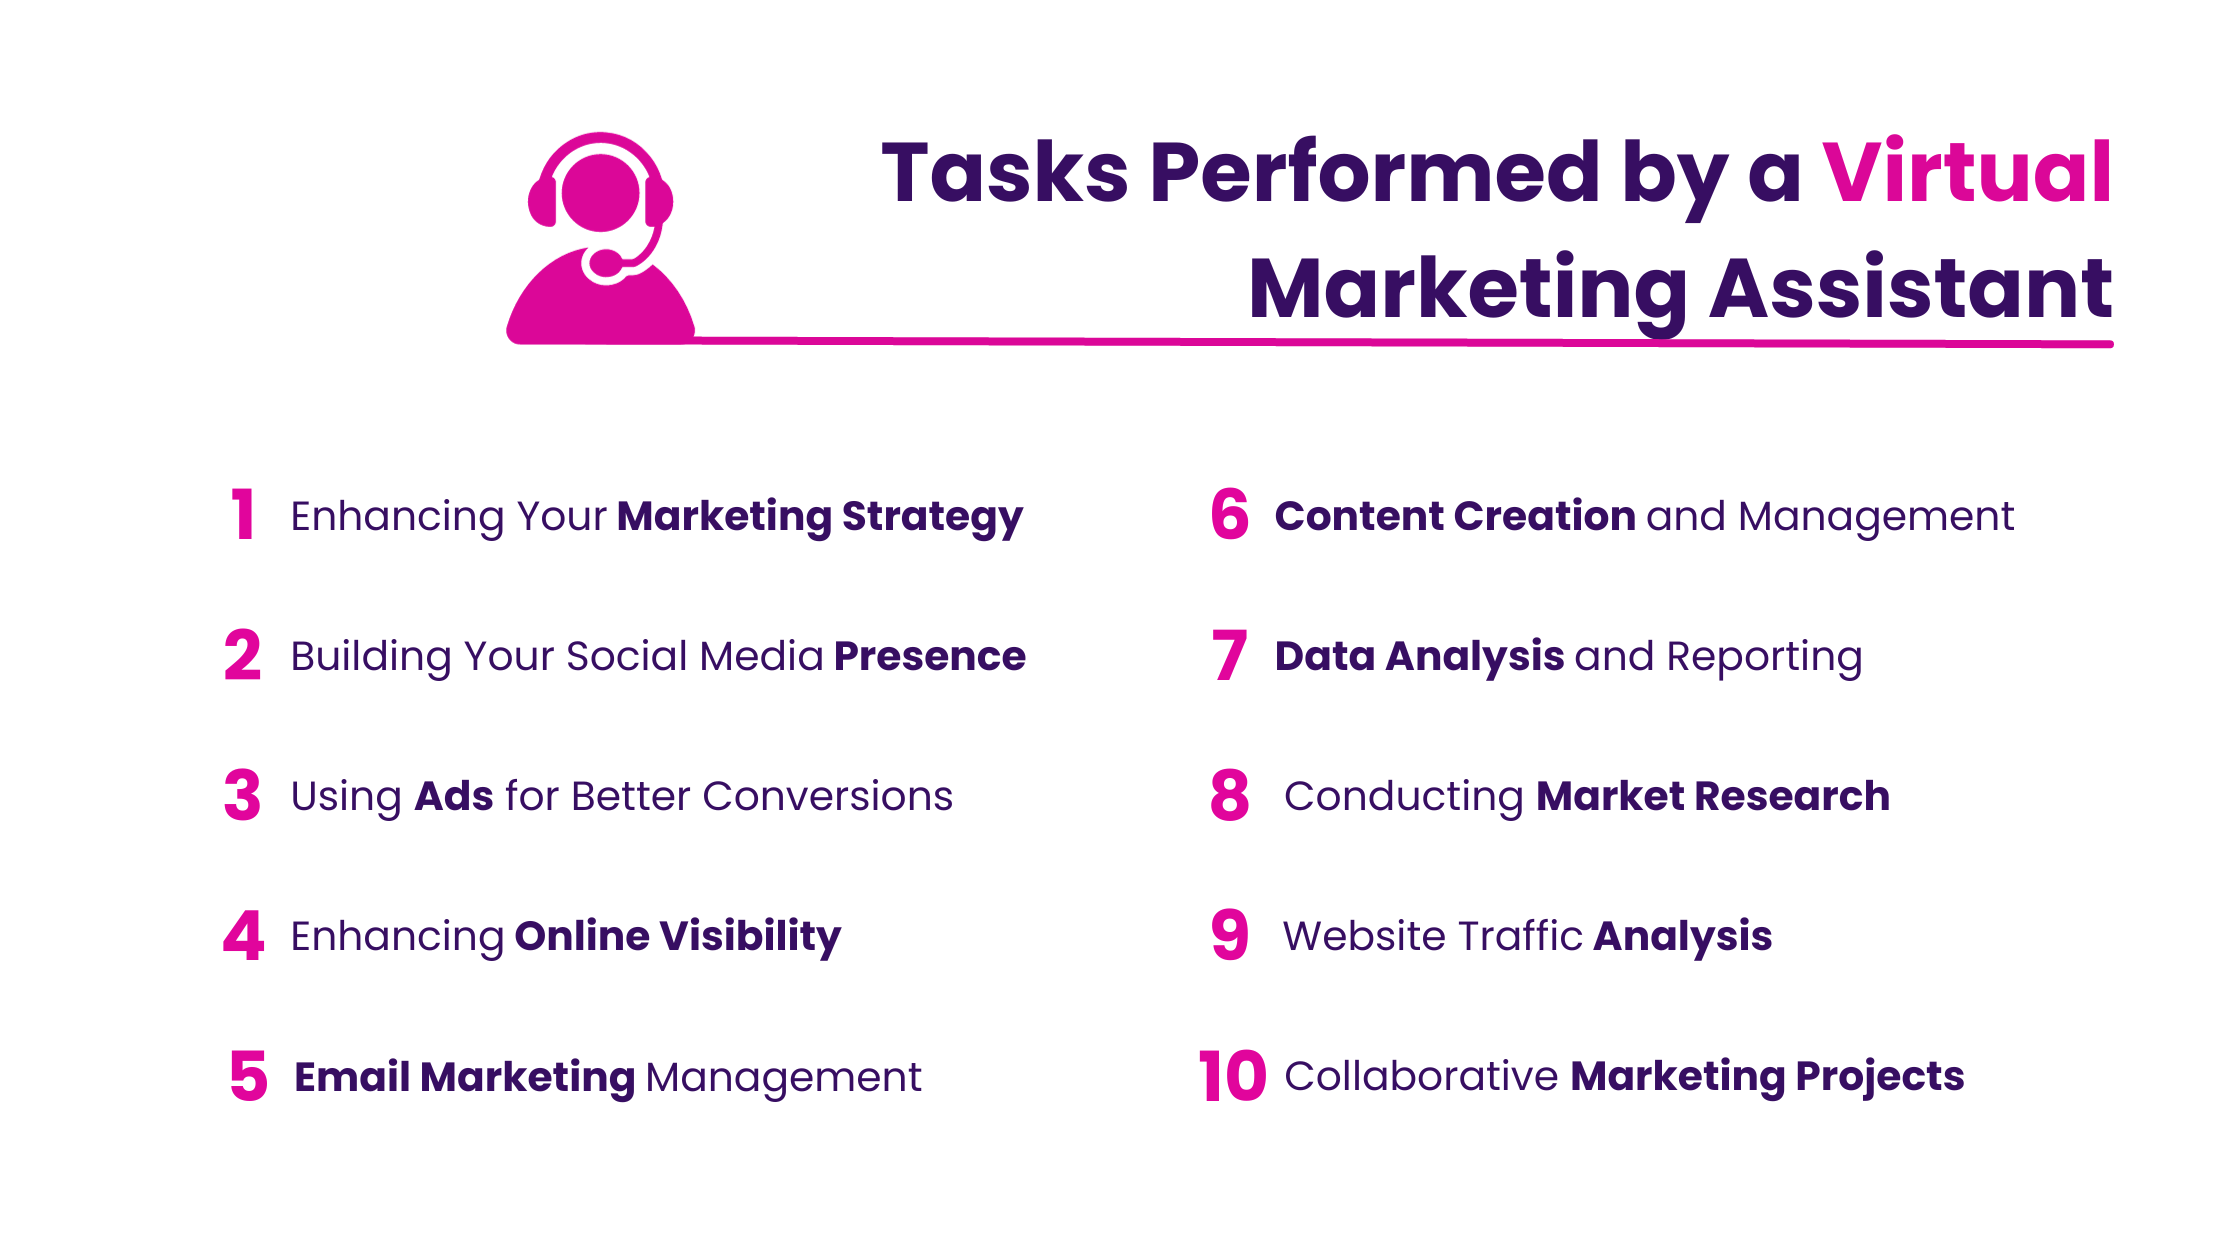 Tasks Performed by a Virtual Marketing Assistant